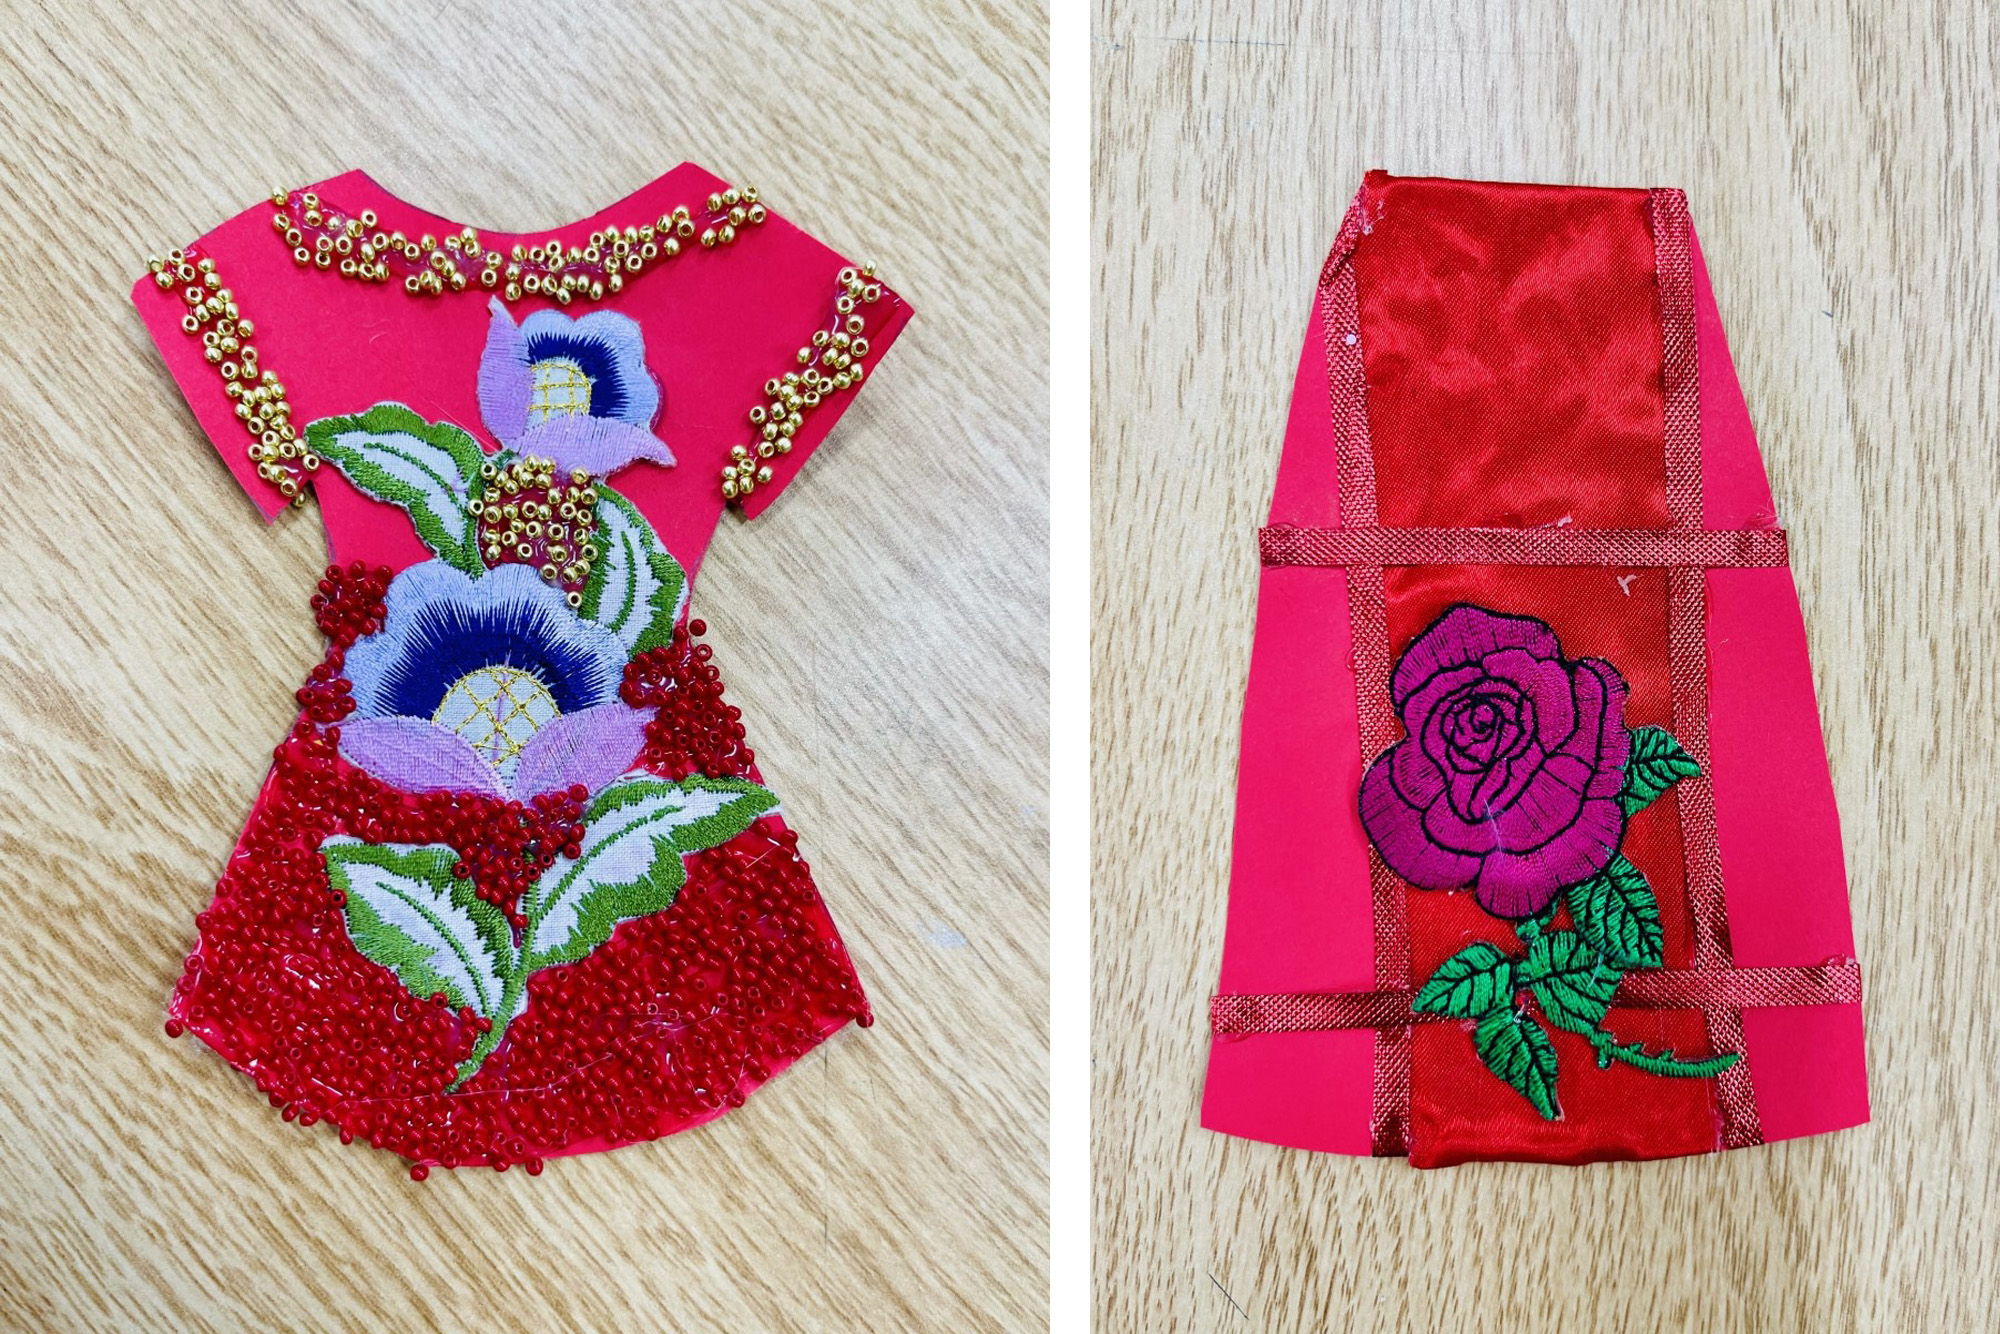 A miniature red dress made from paper, beads, and other materials. Two photos show the front and back of the dress.